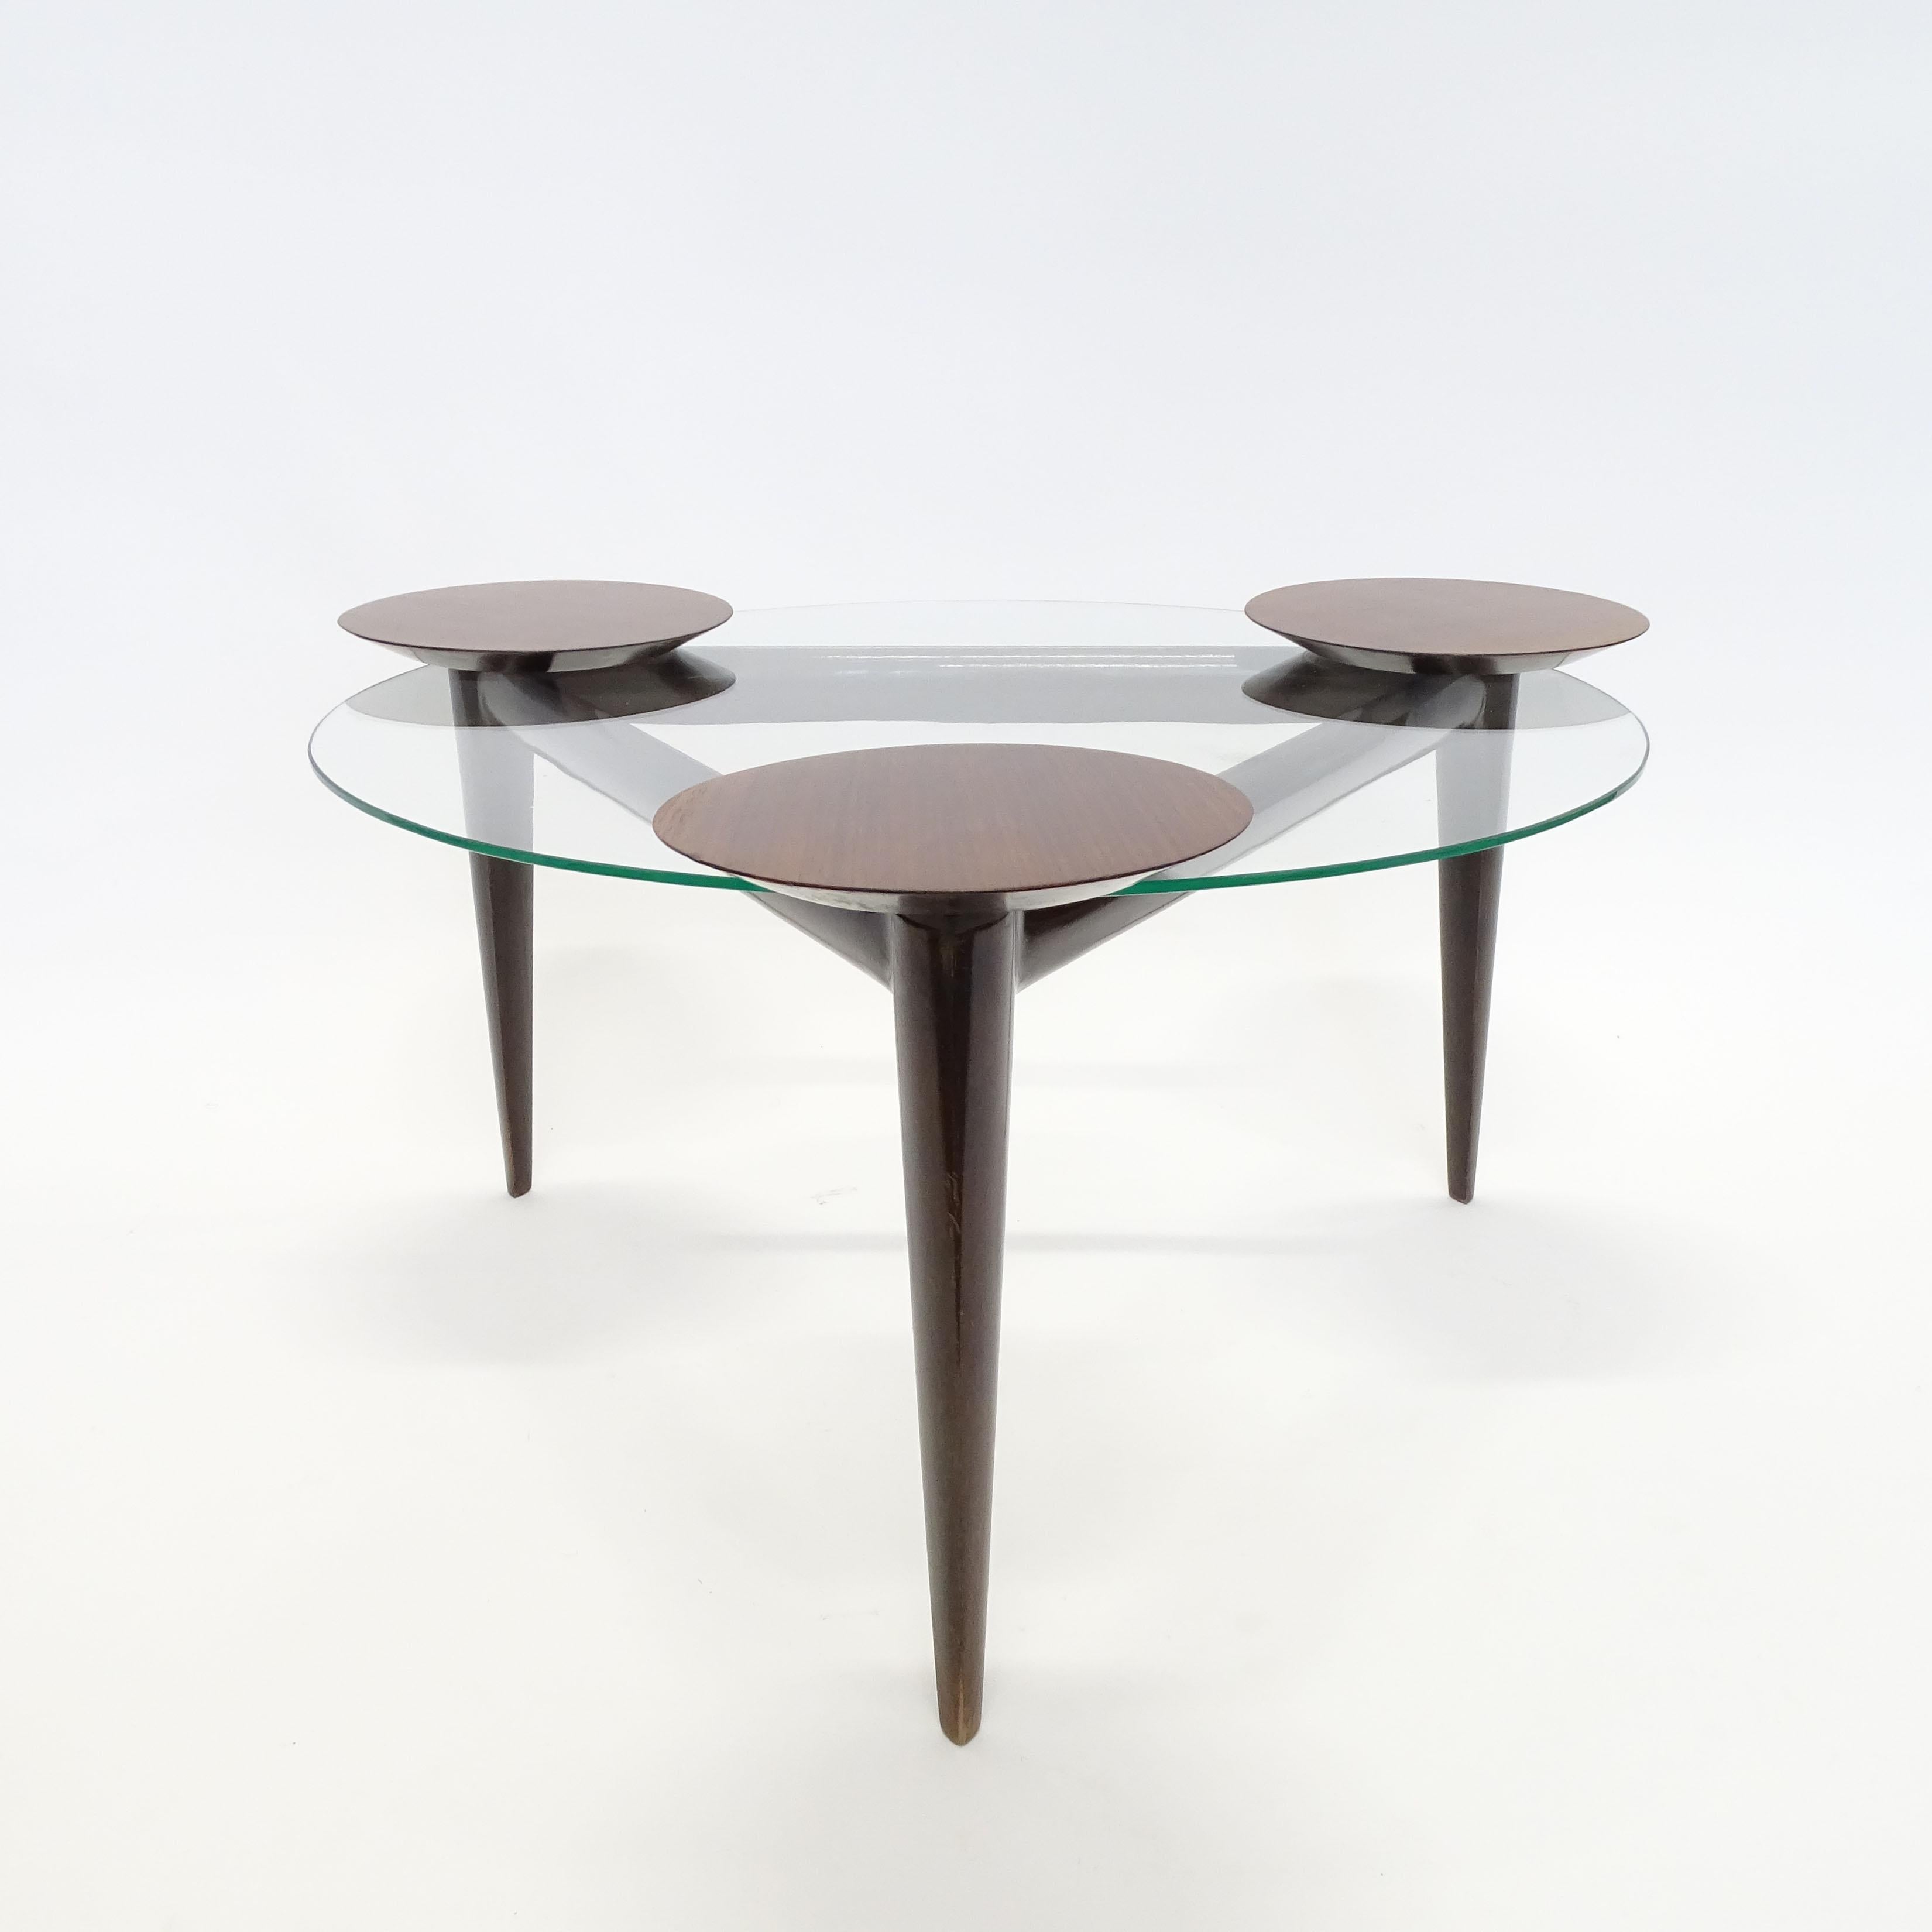 Splendid Italian 1950s Coffee Table with Rotating Wooden Trays In Good Condition For Sale In Milan, IT